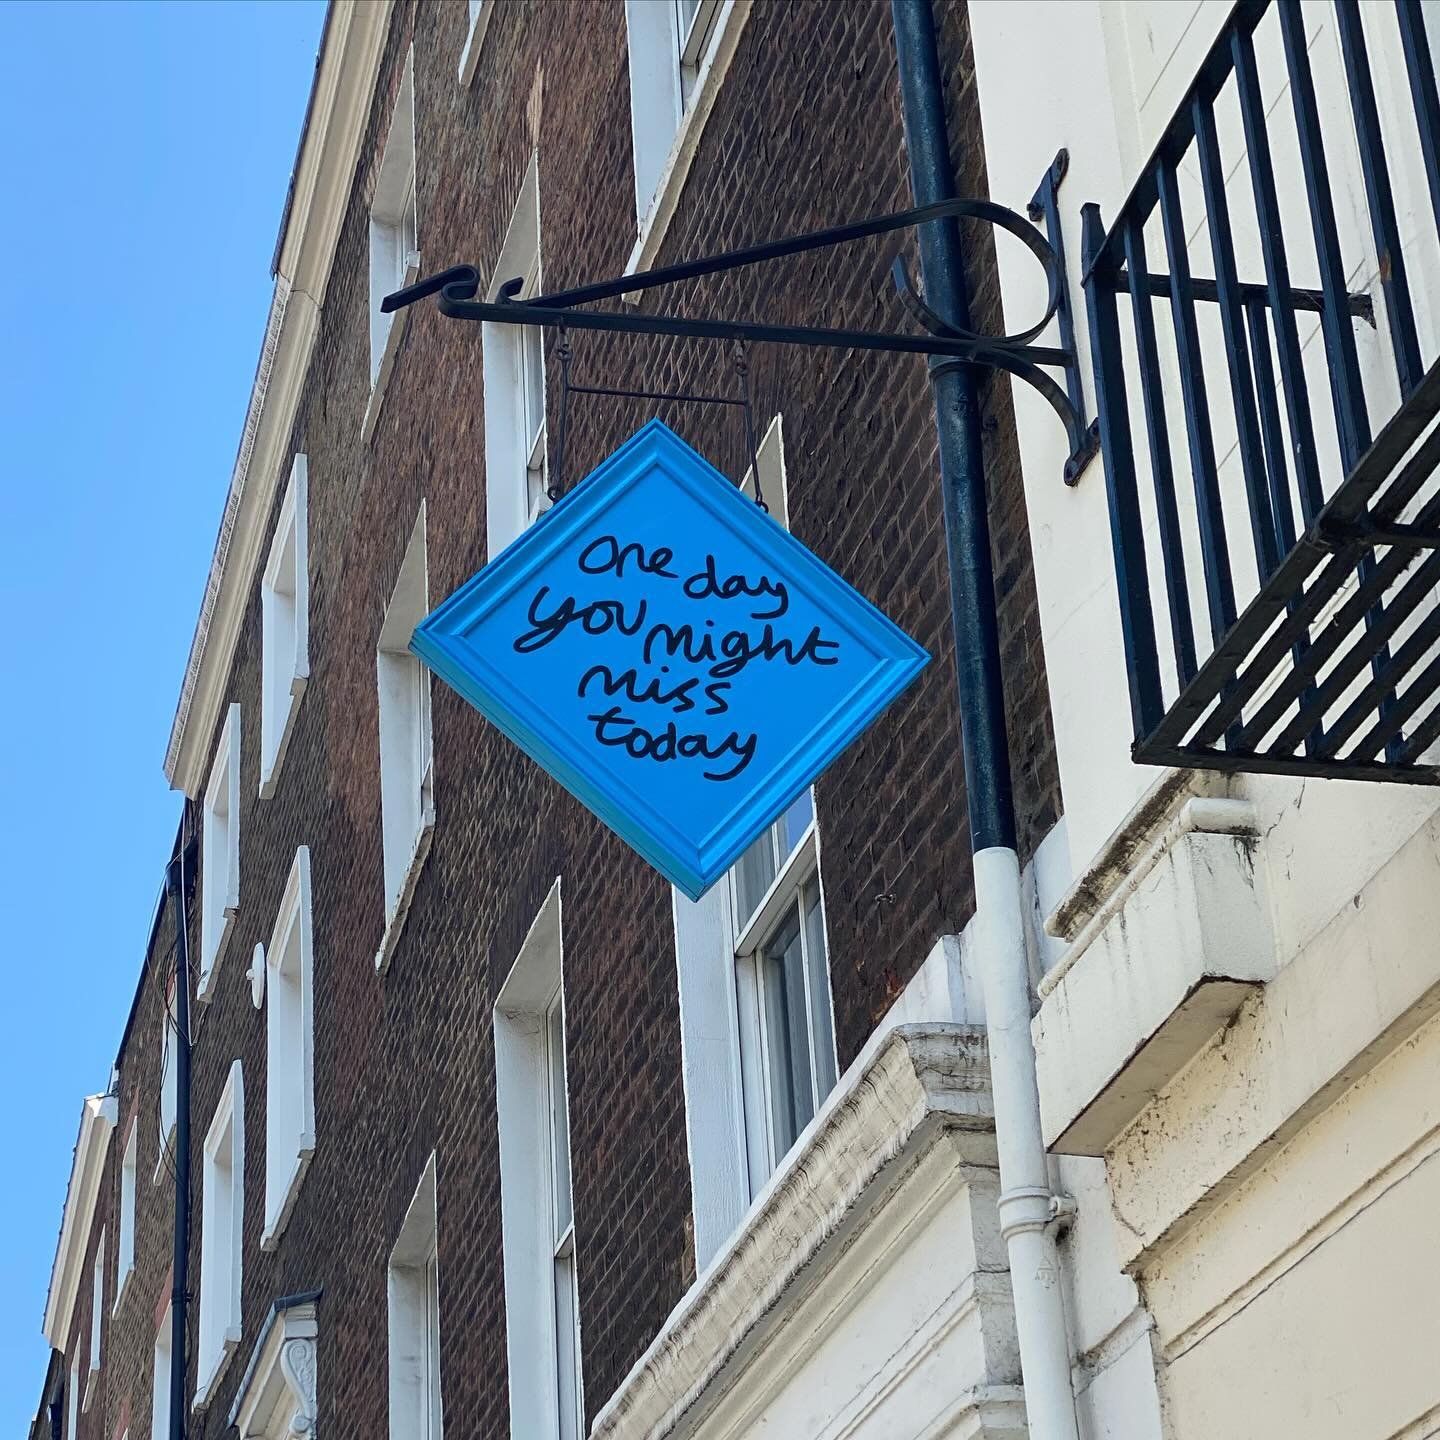 A dear friend sent me these pics from my favorite my place in London&hellip; Marylebone 💕. I loved each message and had to share as a reminder for us all💕. Thanks @carollynne89